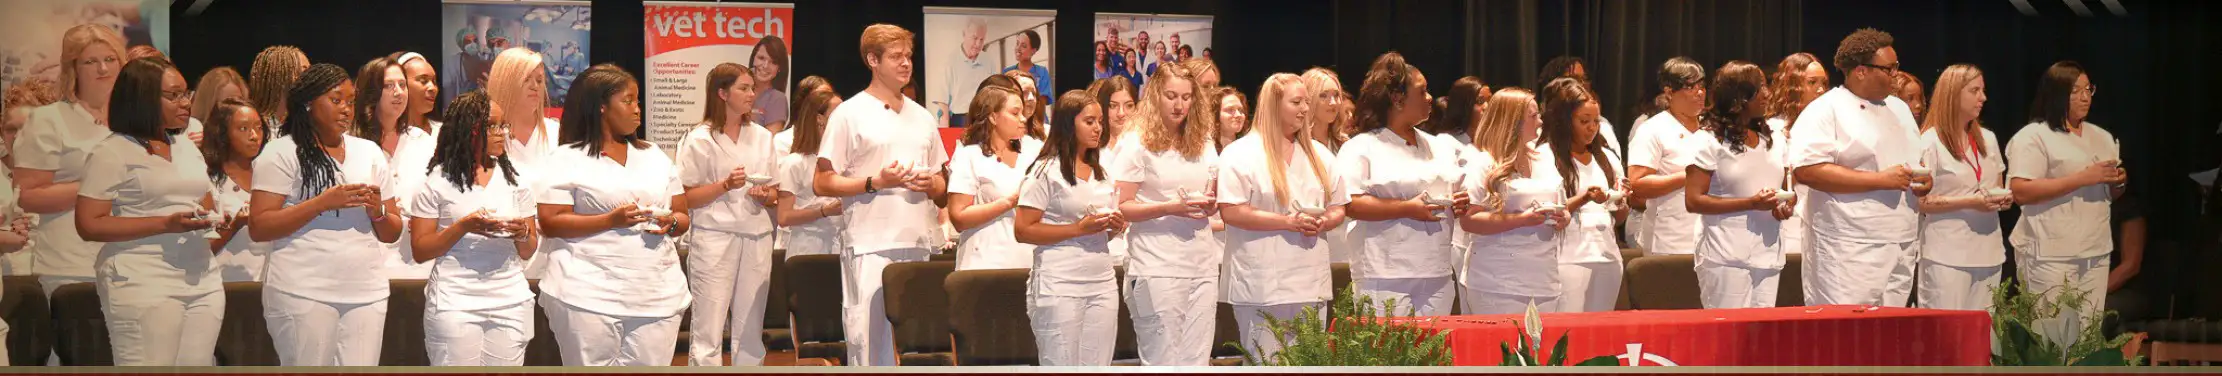 BRCC to hold Pinning Ceremonies for Nursing and Allied Health Graduates on Friday, May 19 